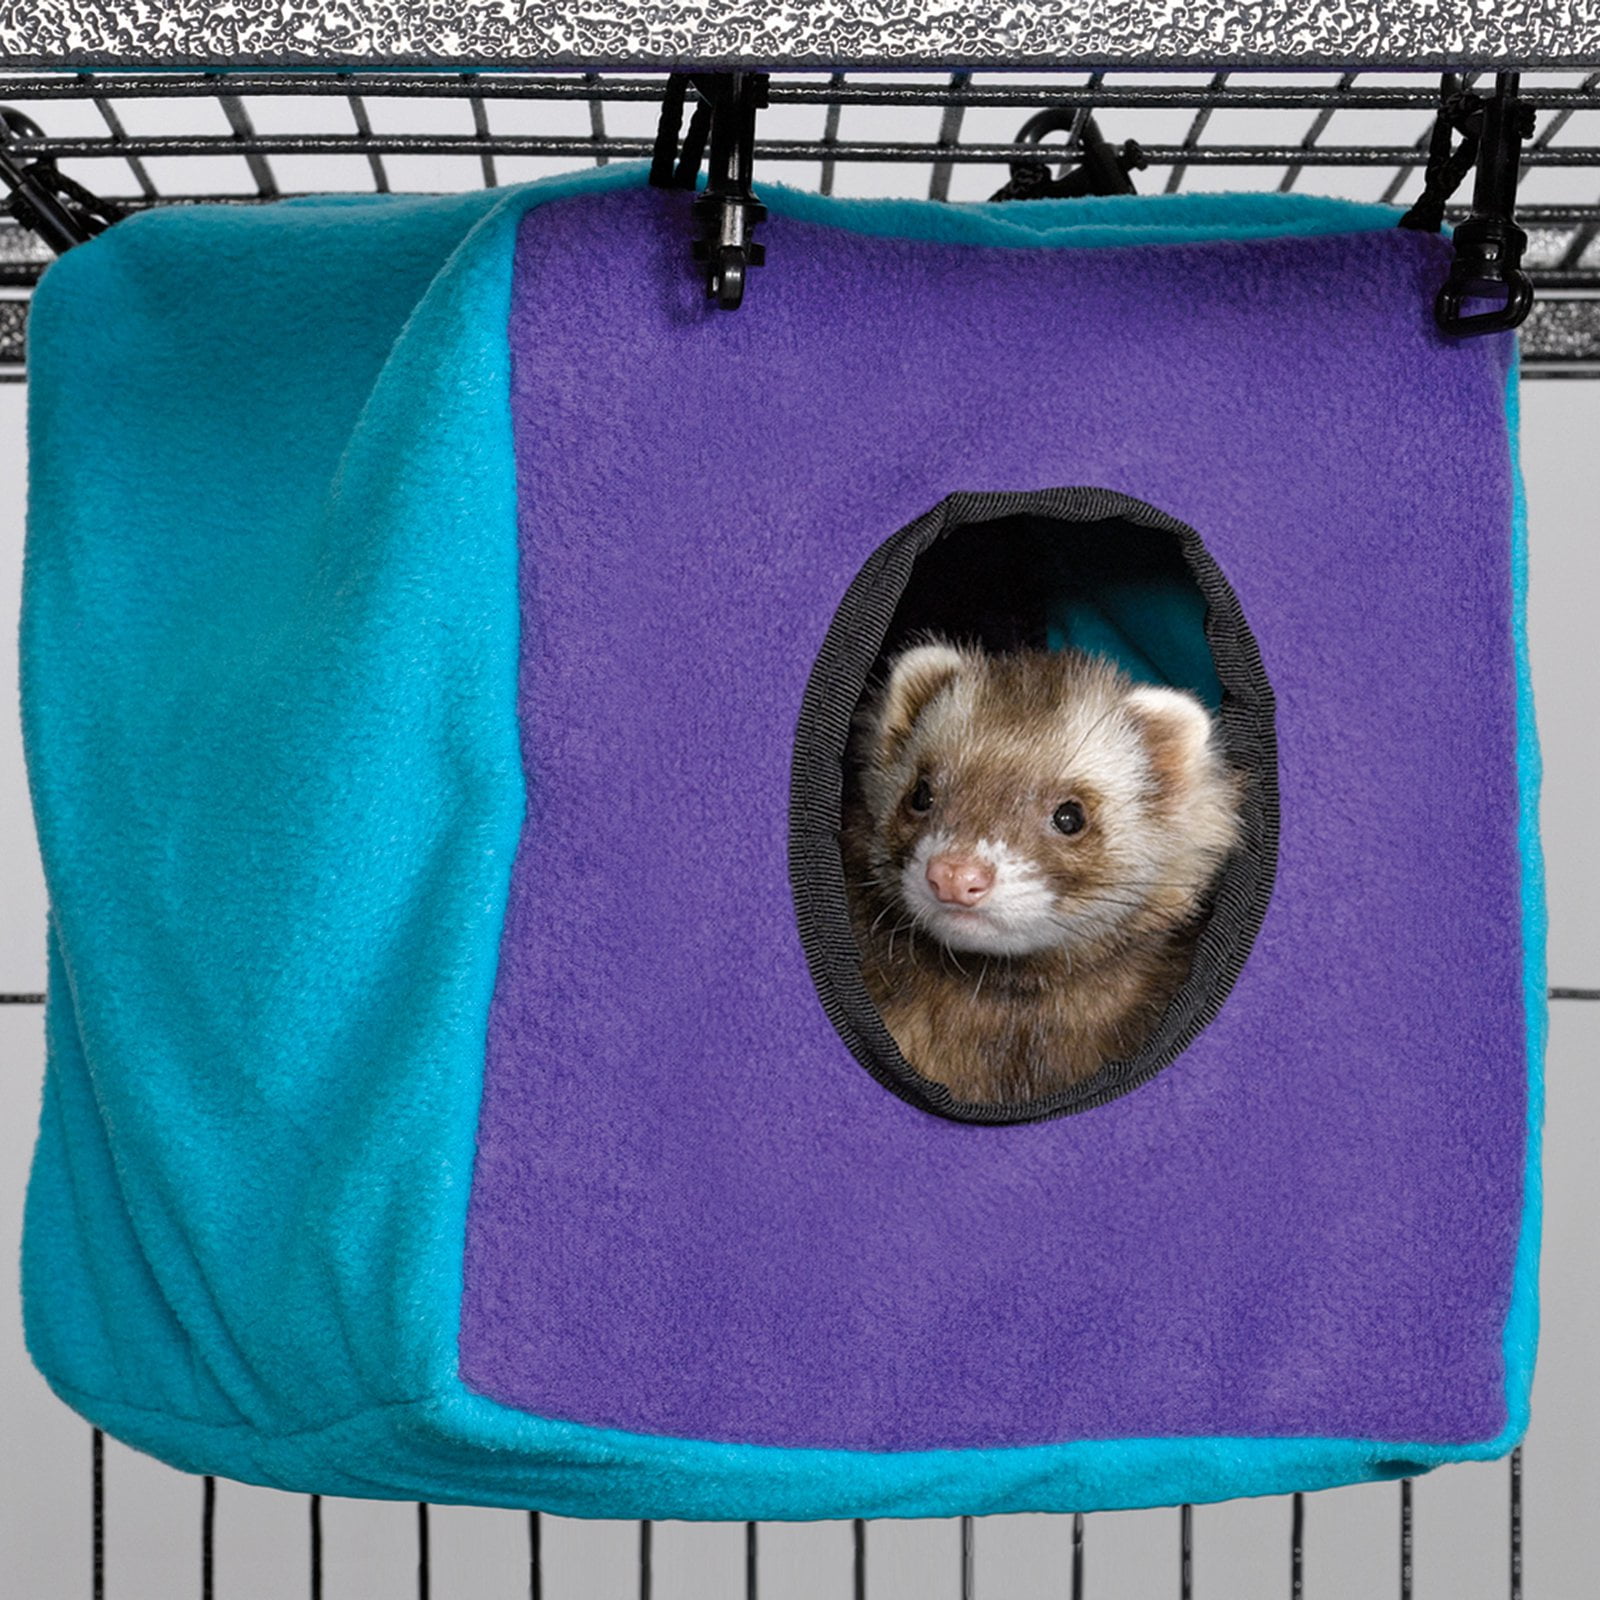 Four Ferrets in Their Wild Habitat Carry-All Pouch by mario's